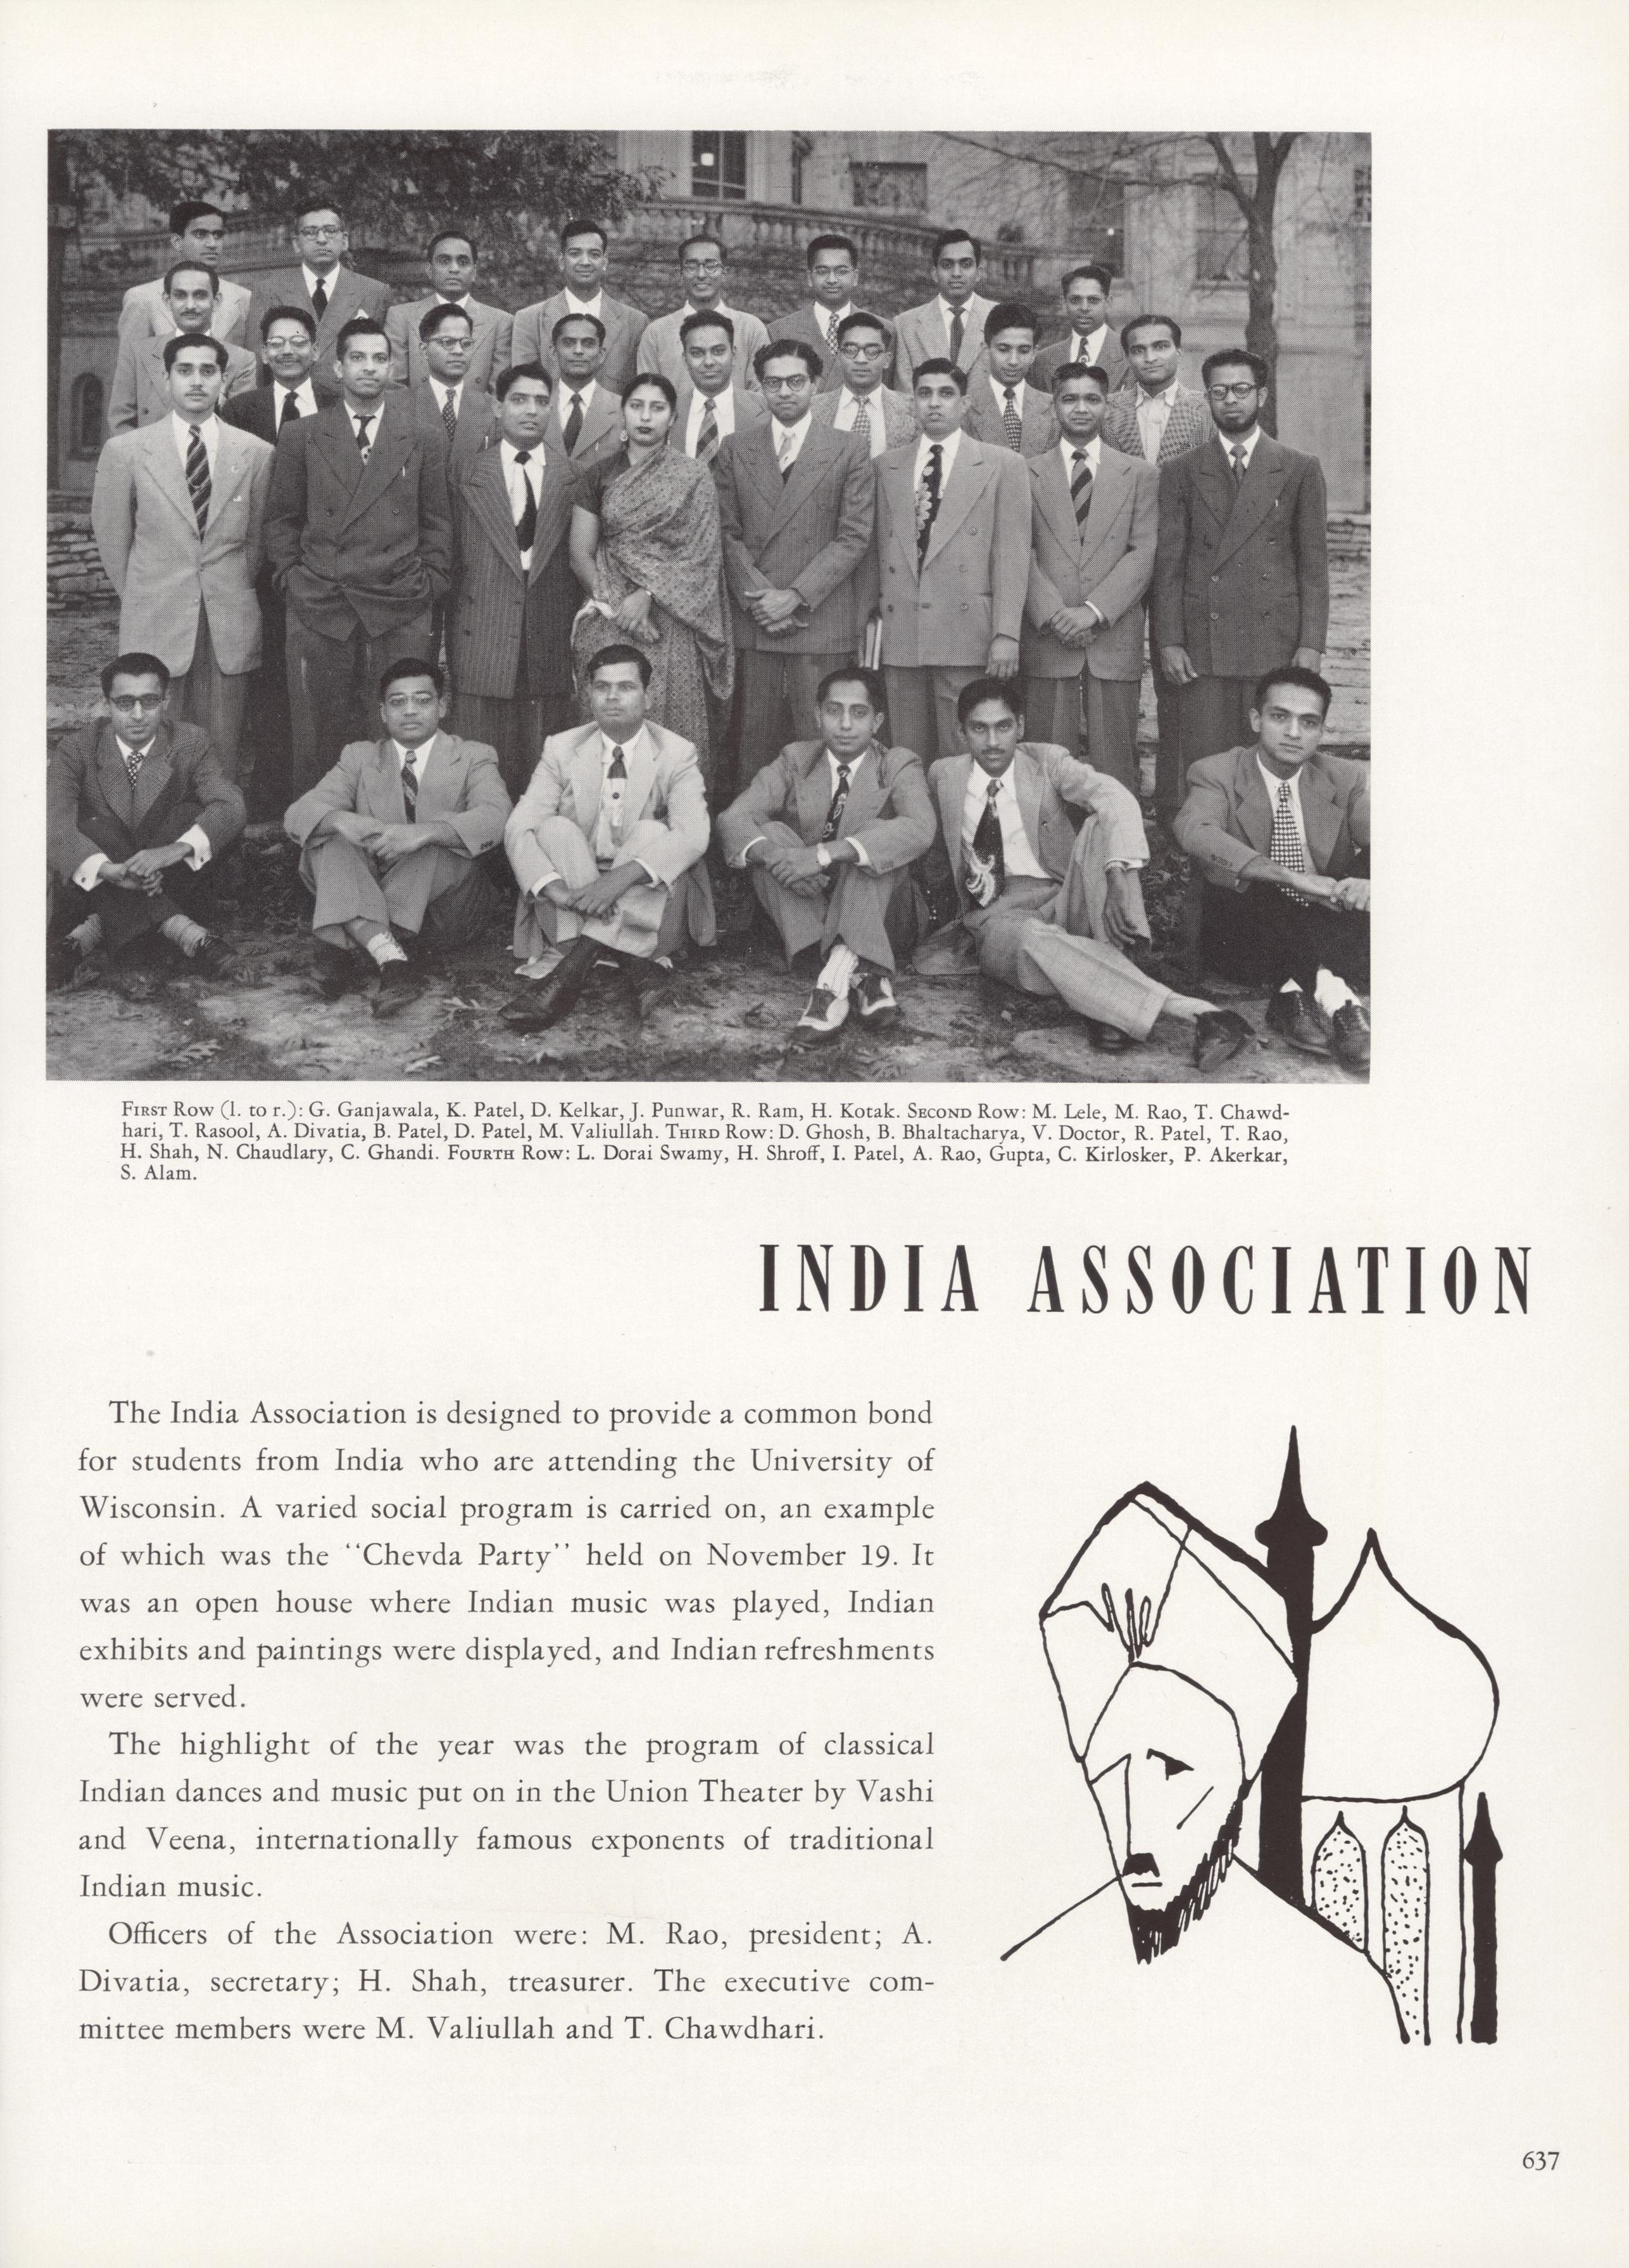 A yearbook page with black and white group photo, text and an illustration of an Indian man